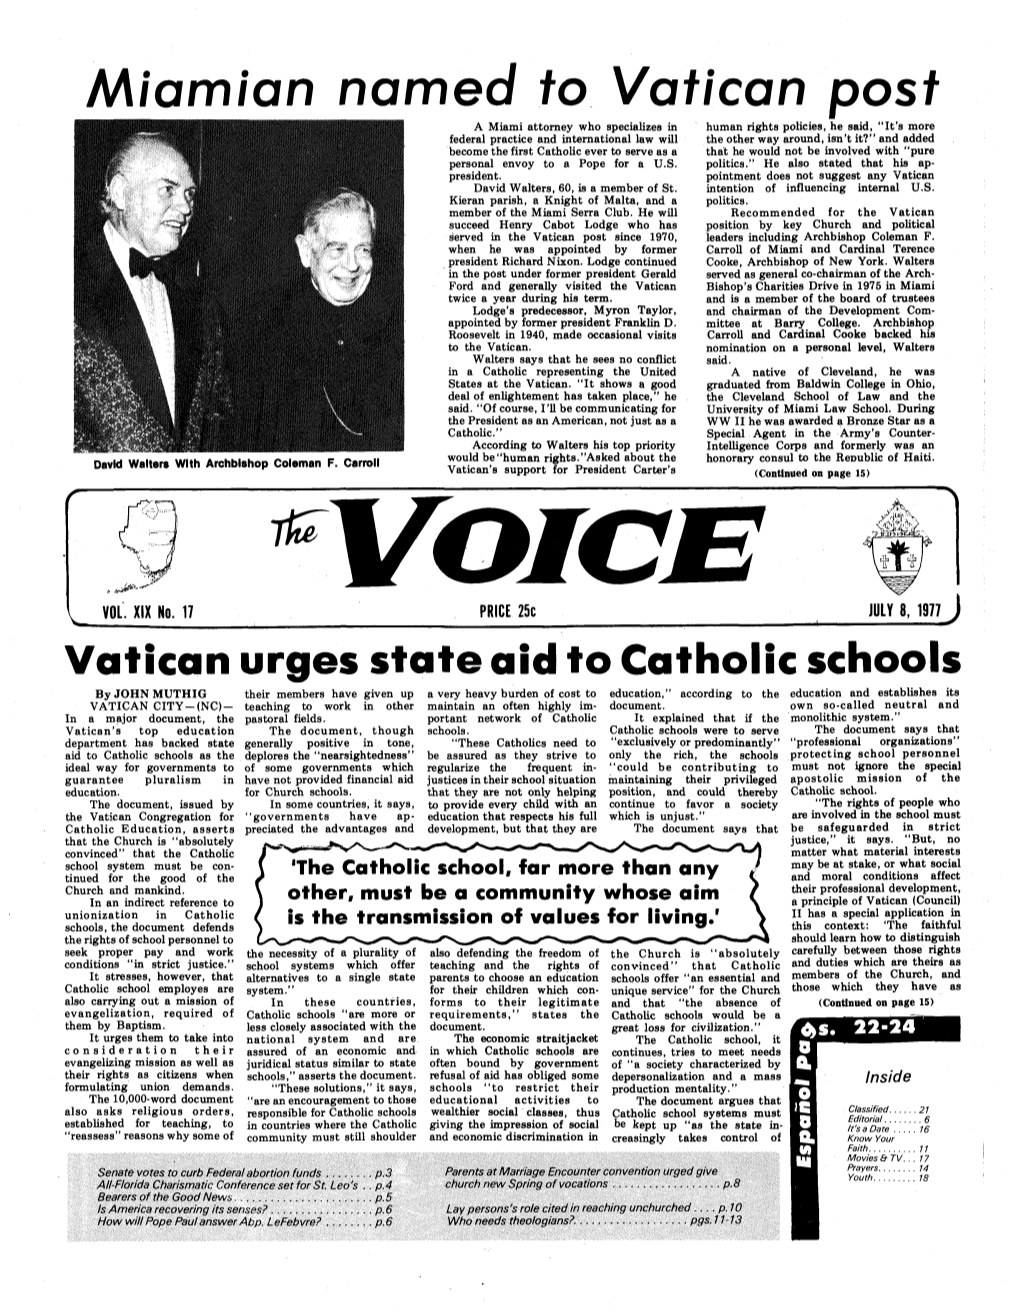 Miamian Named to Vatican Post